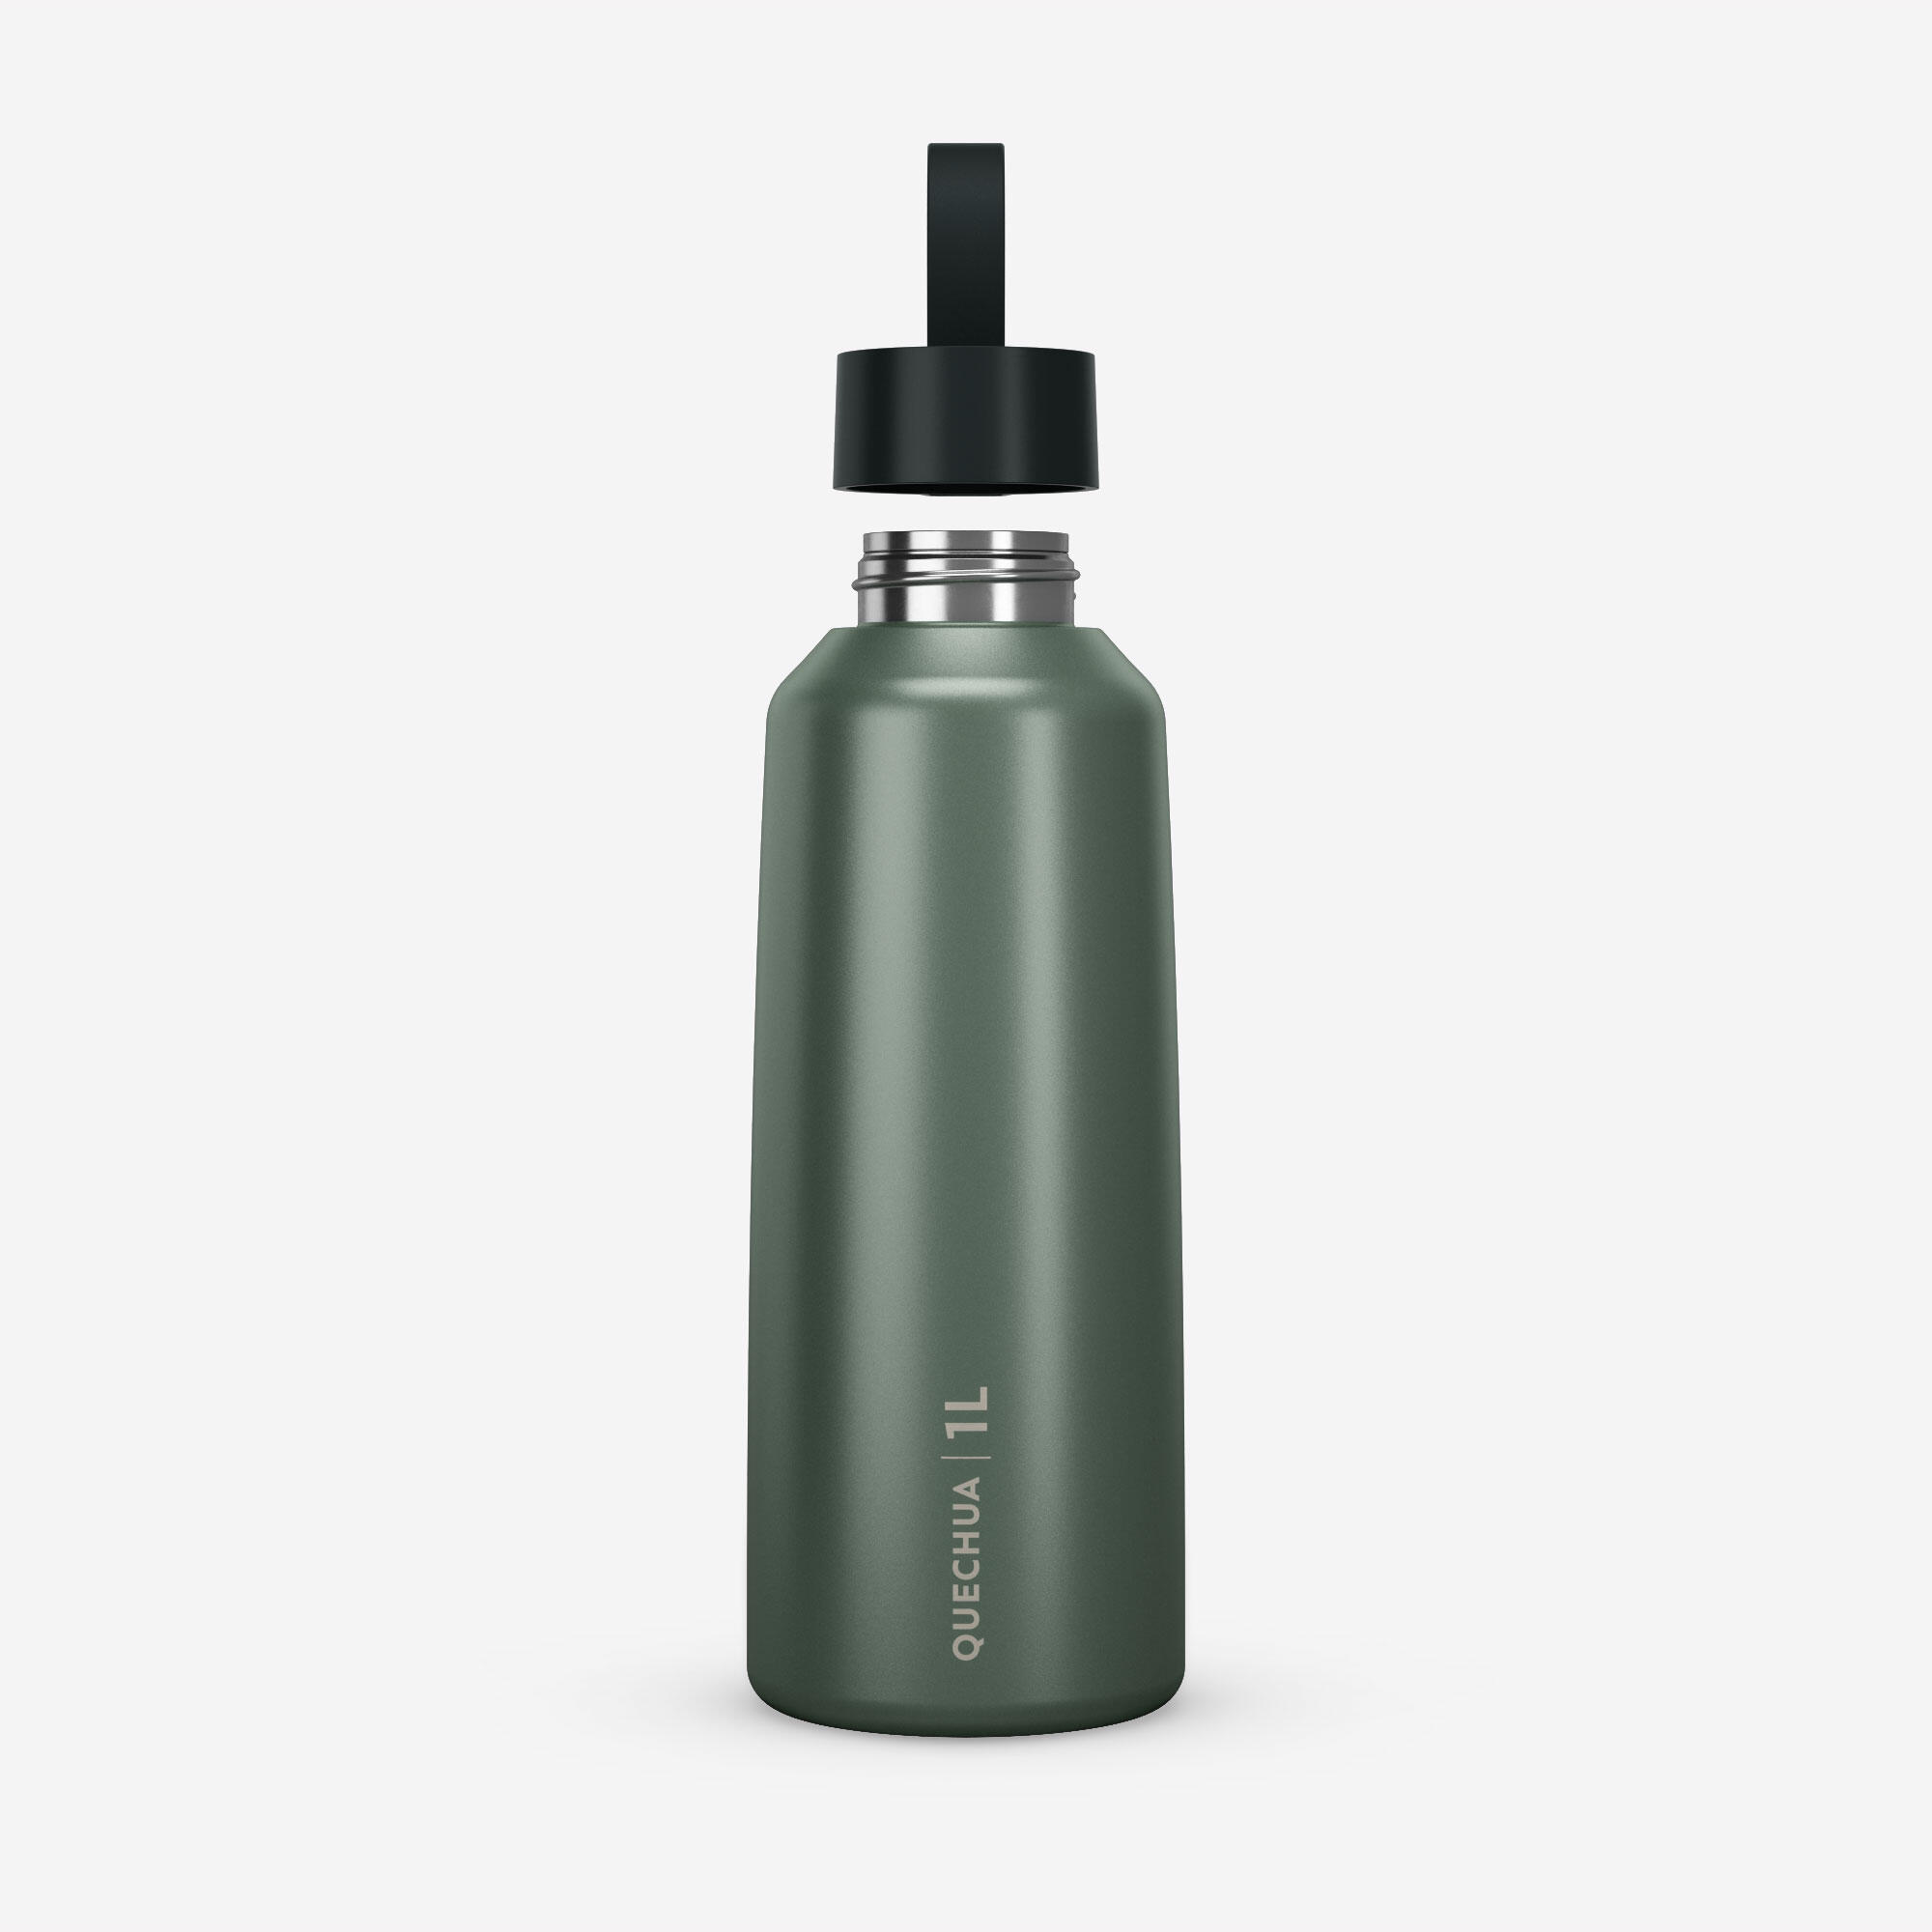 Stainless steel flask with screw cap for hiking 1 L - green 7/11